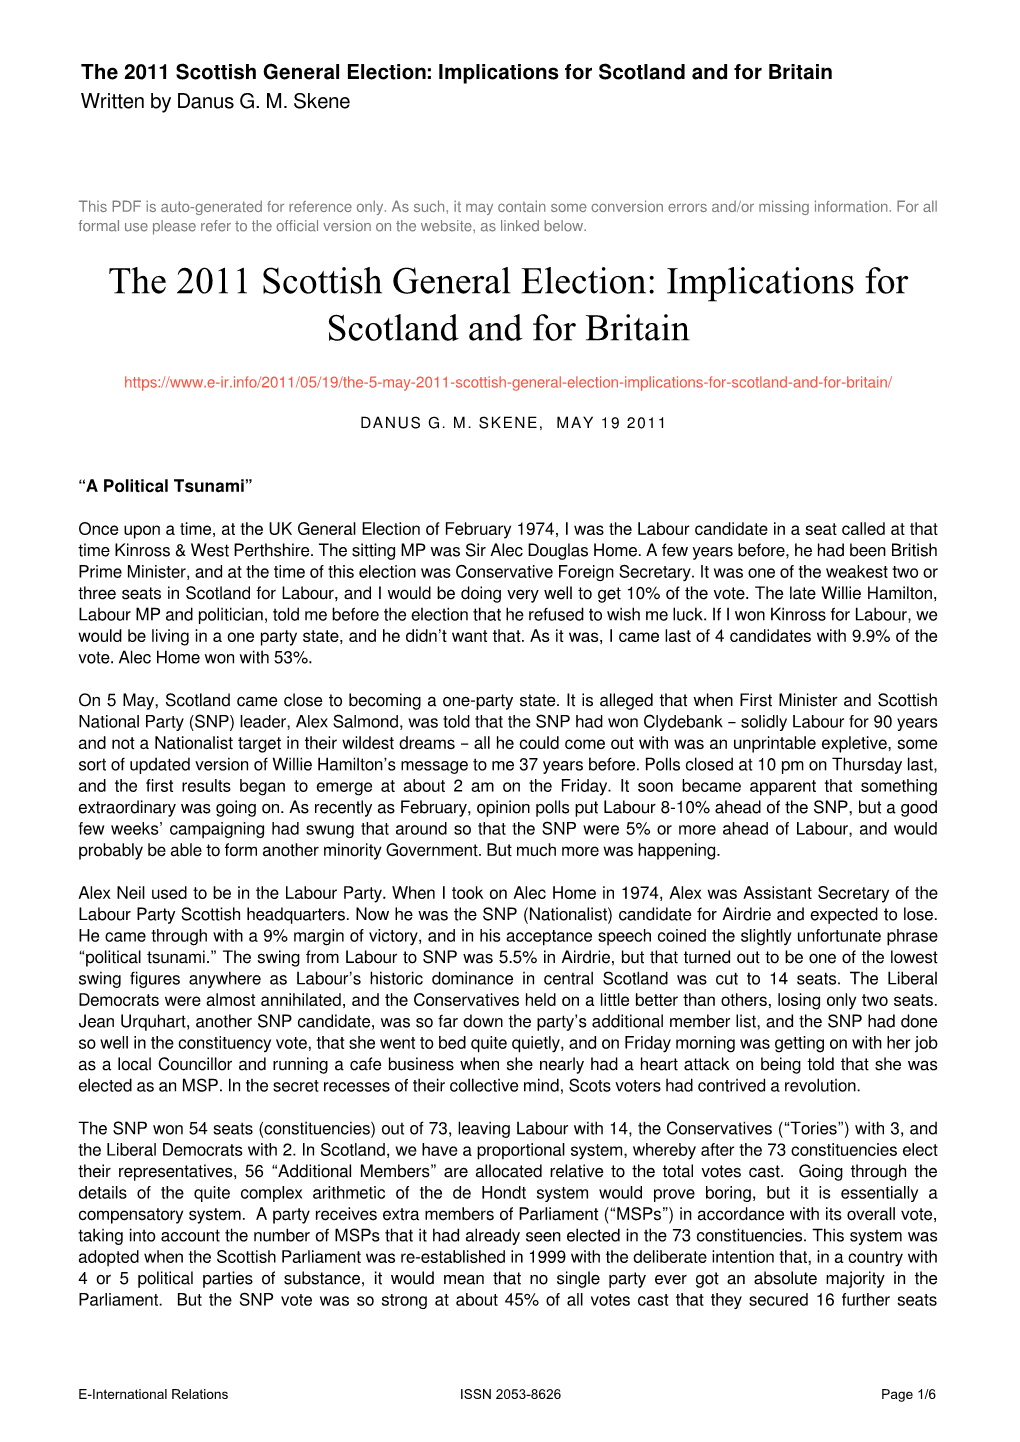 The 2011 Scottish General Election: Implications for Scotland and for Britain Written by Danus G